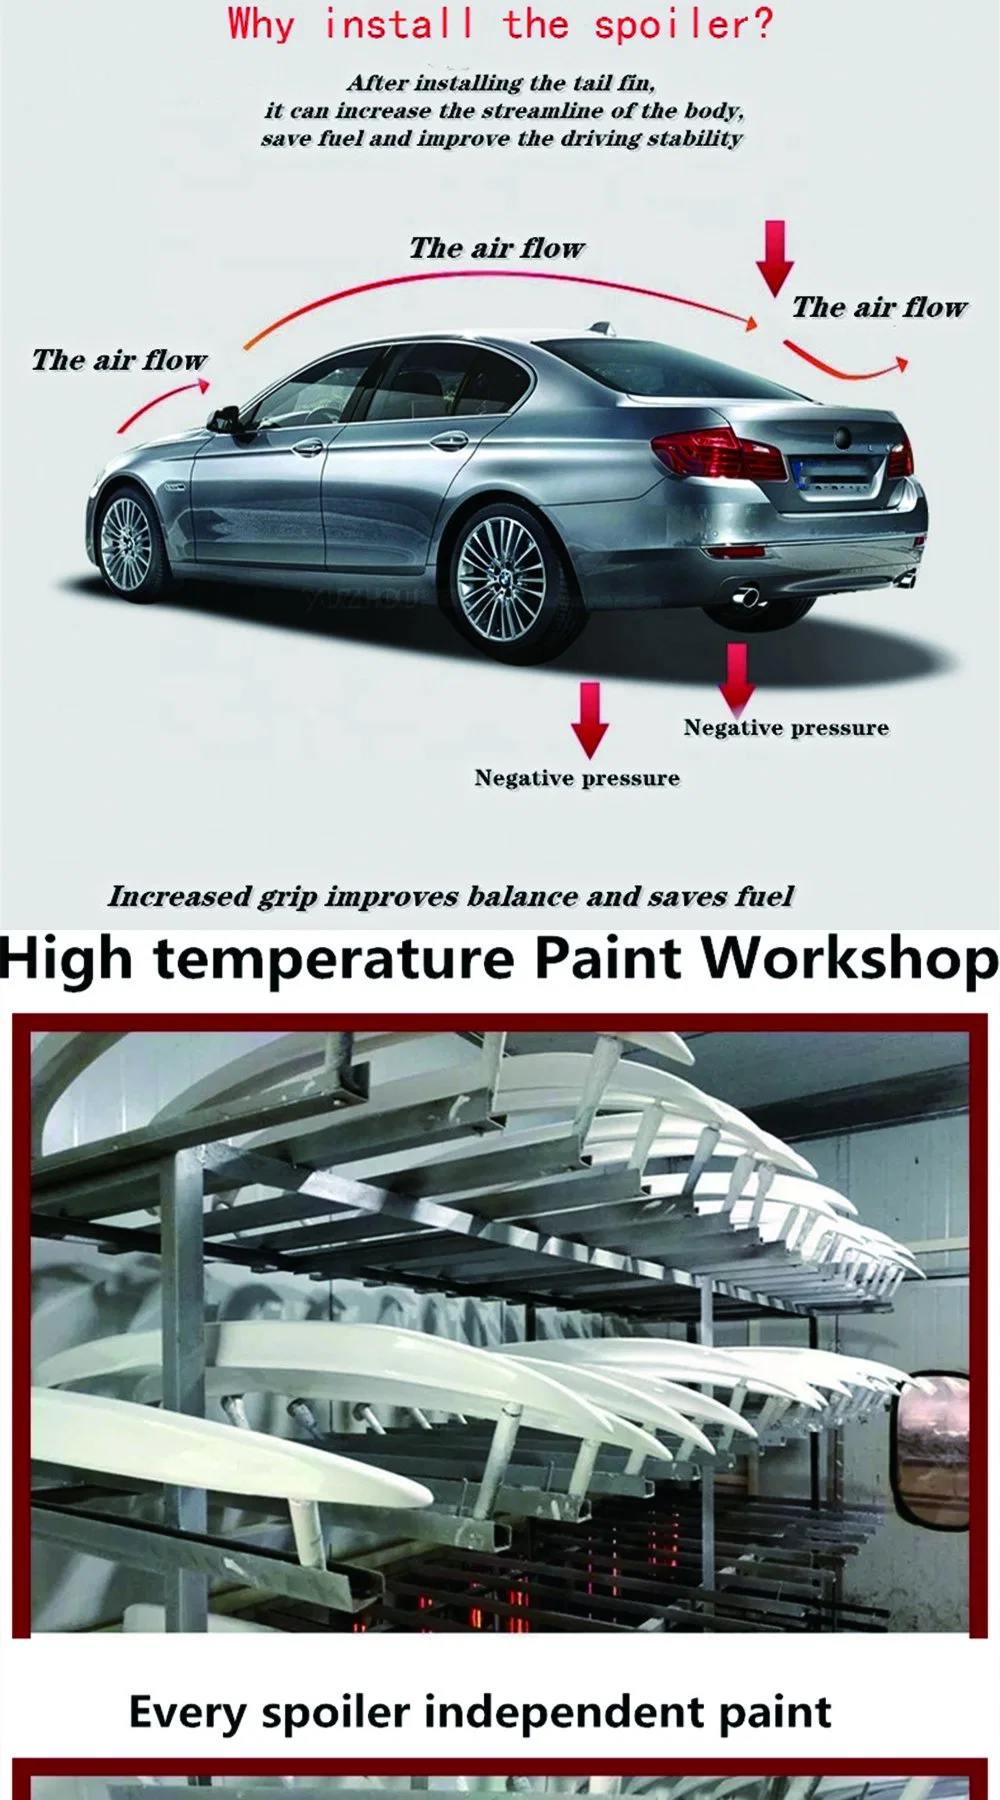 PP Car Spoiler for 4 Generation Universal Rear Spoiler Suit for Two-Compartment Vehicle